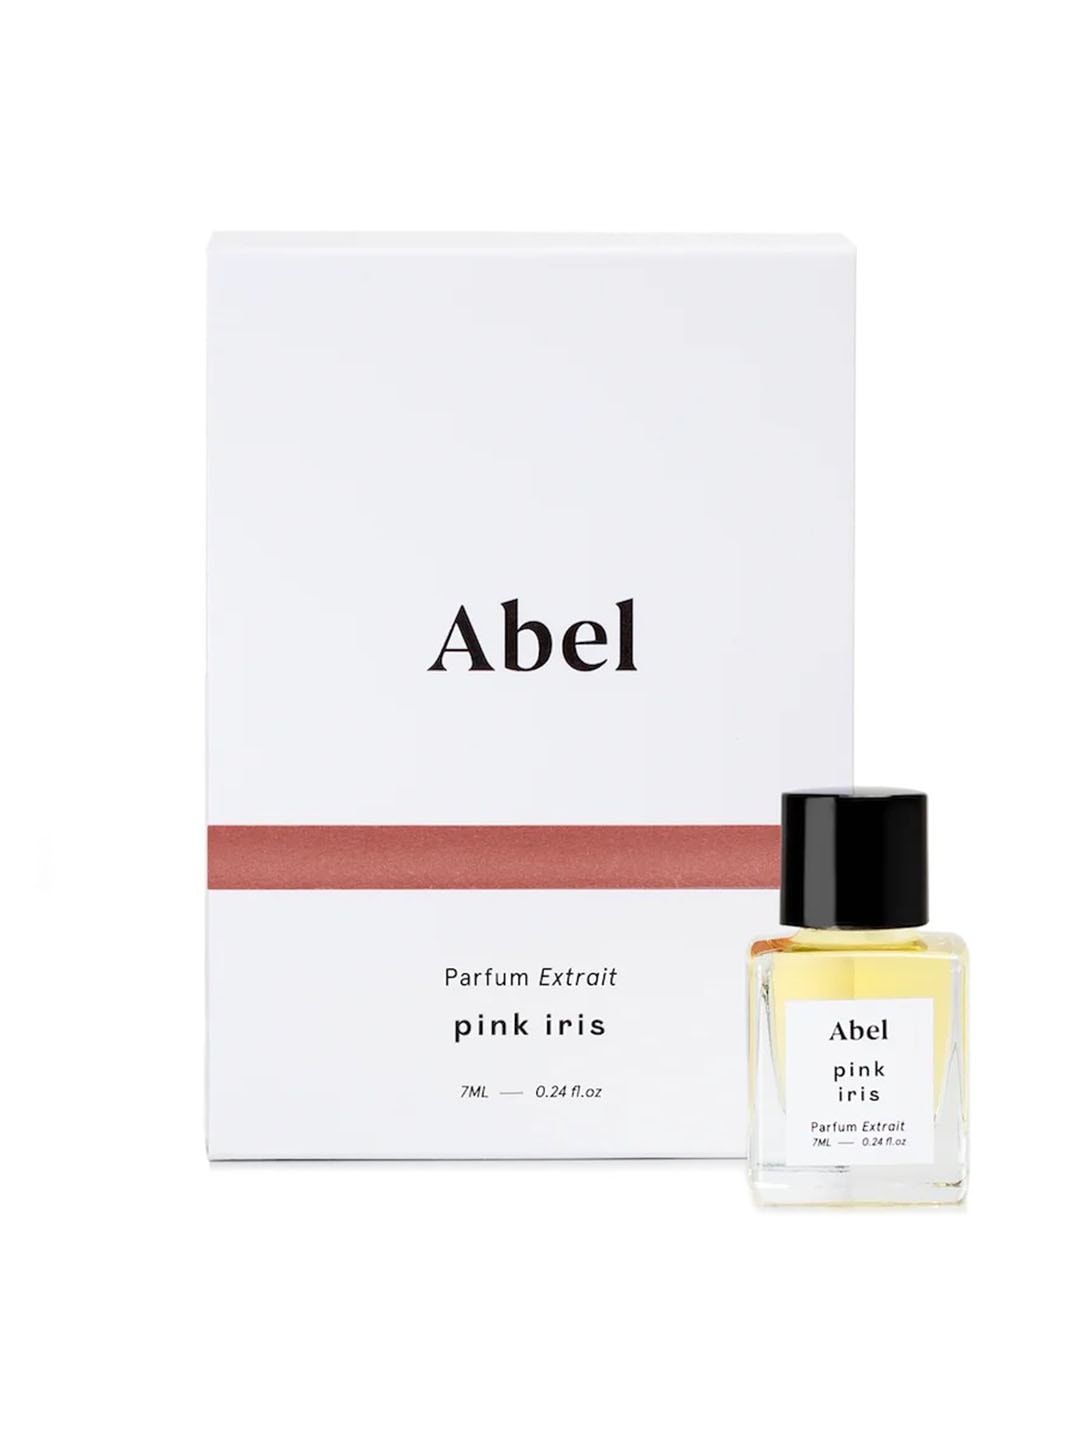 A bottle of Pink Iris Parfum Extrait by Abel in a pink box with a captivating scent.